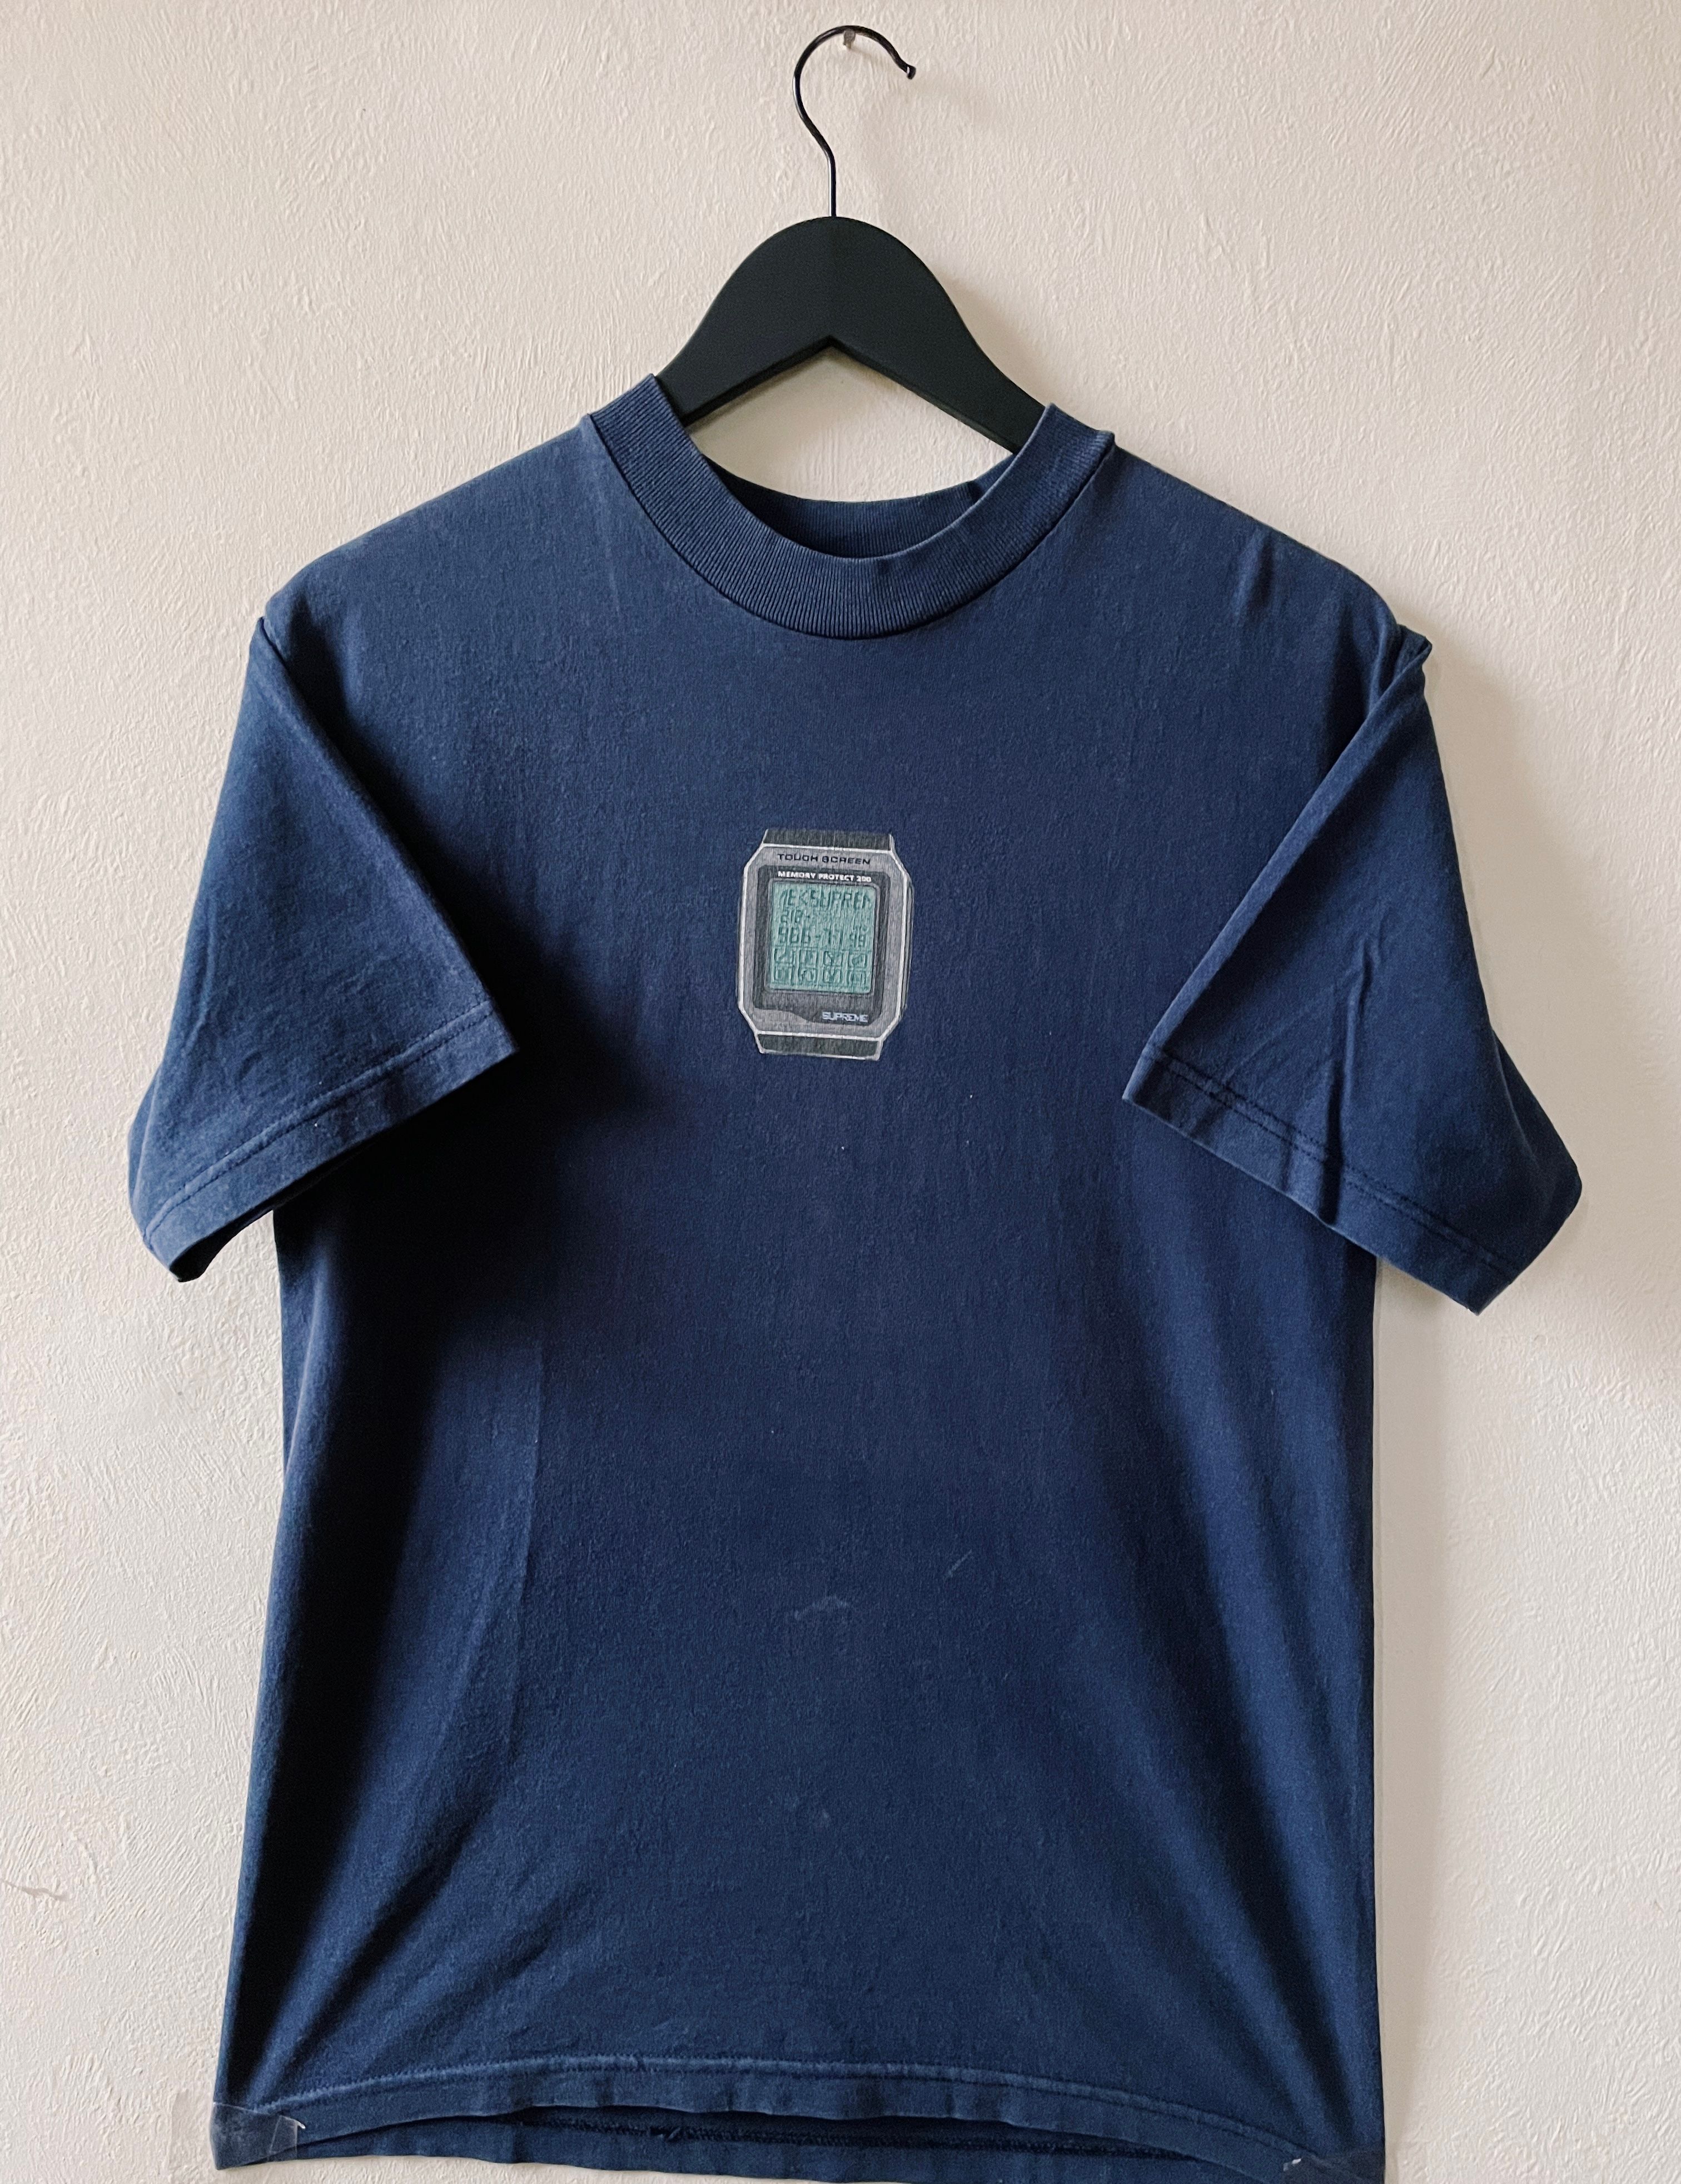 Pre-owned Supreme X Vintage 1998 Supreme Casio Watch T-shirt Navy